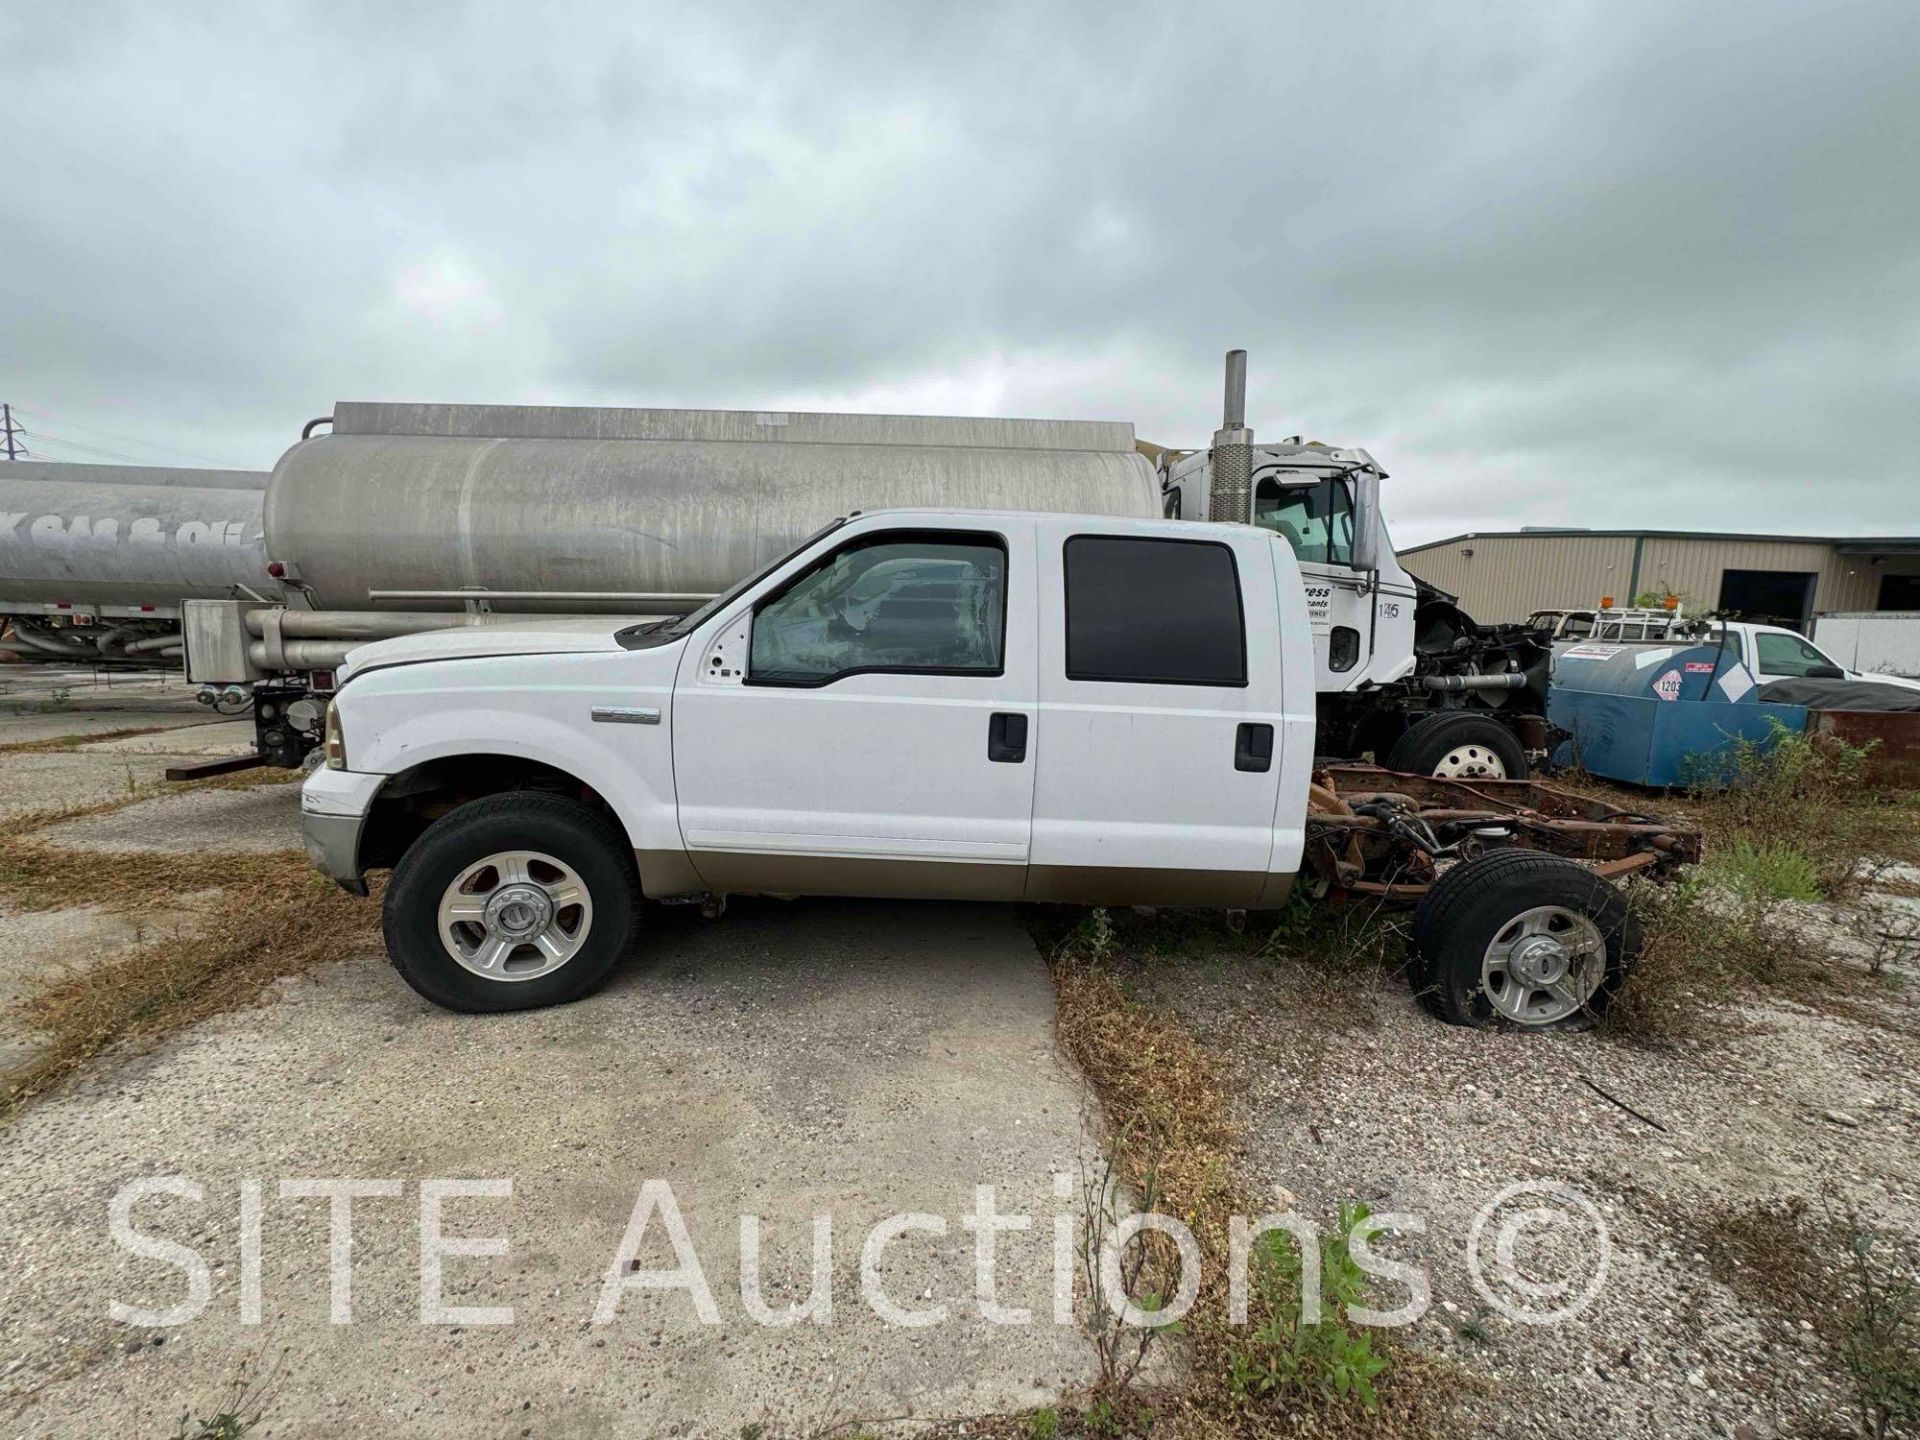 2005 Ford F250 Cab & Chassis Truck - Image 4 of 16